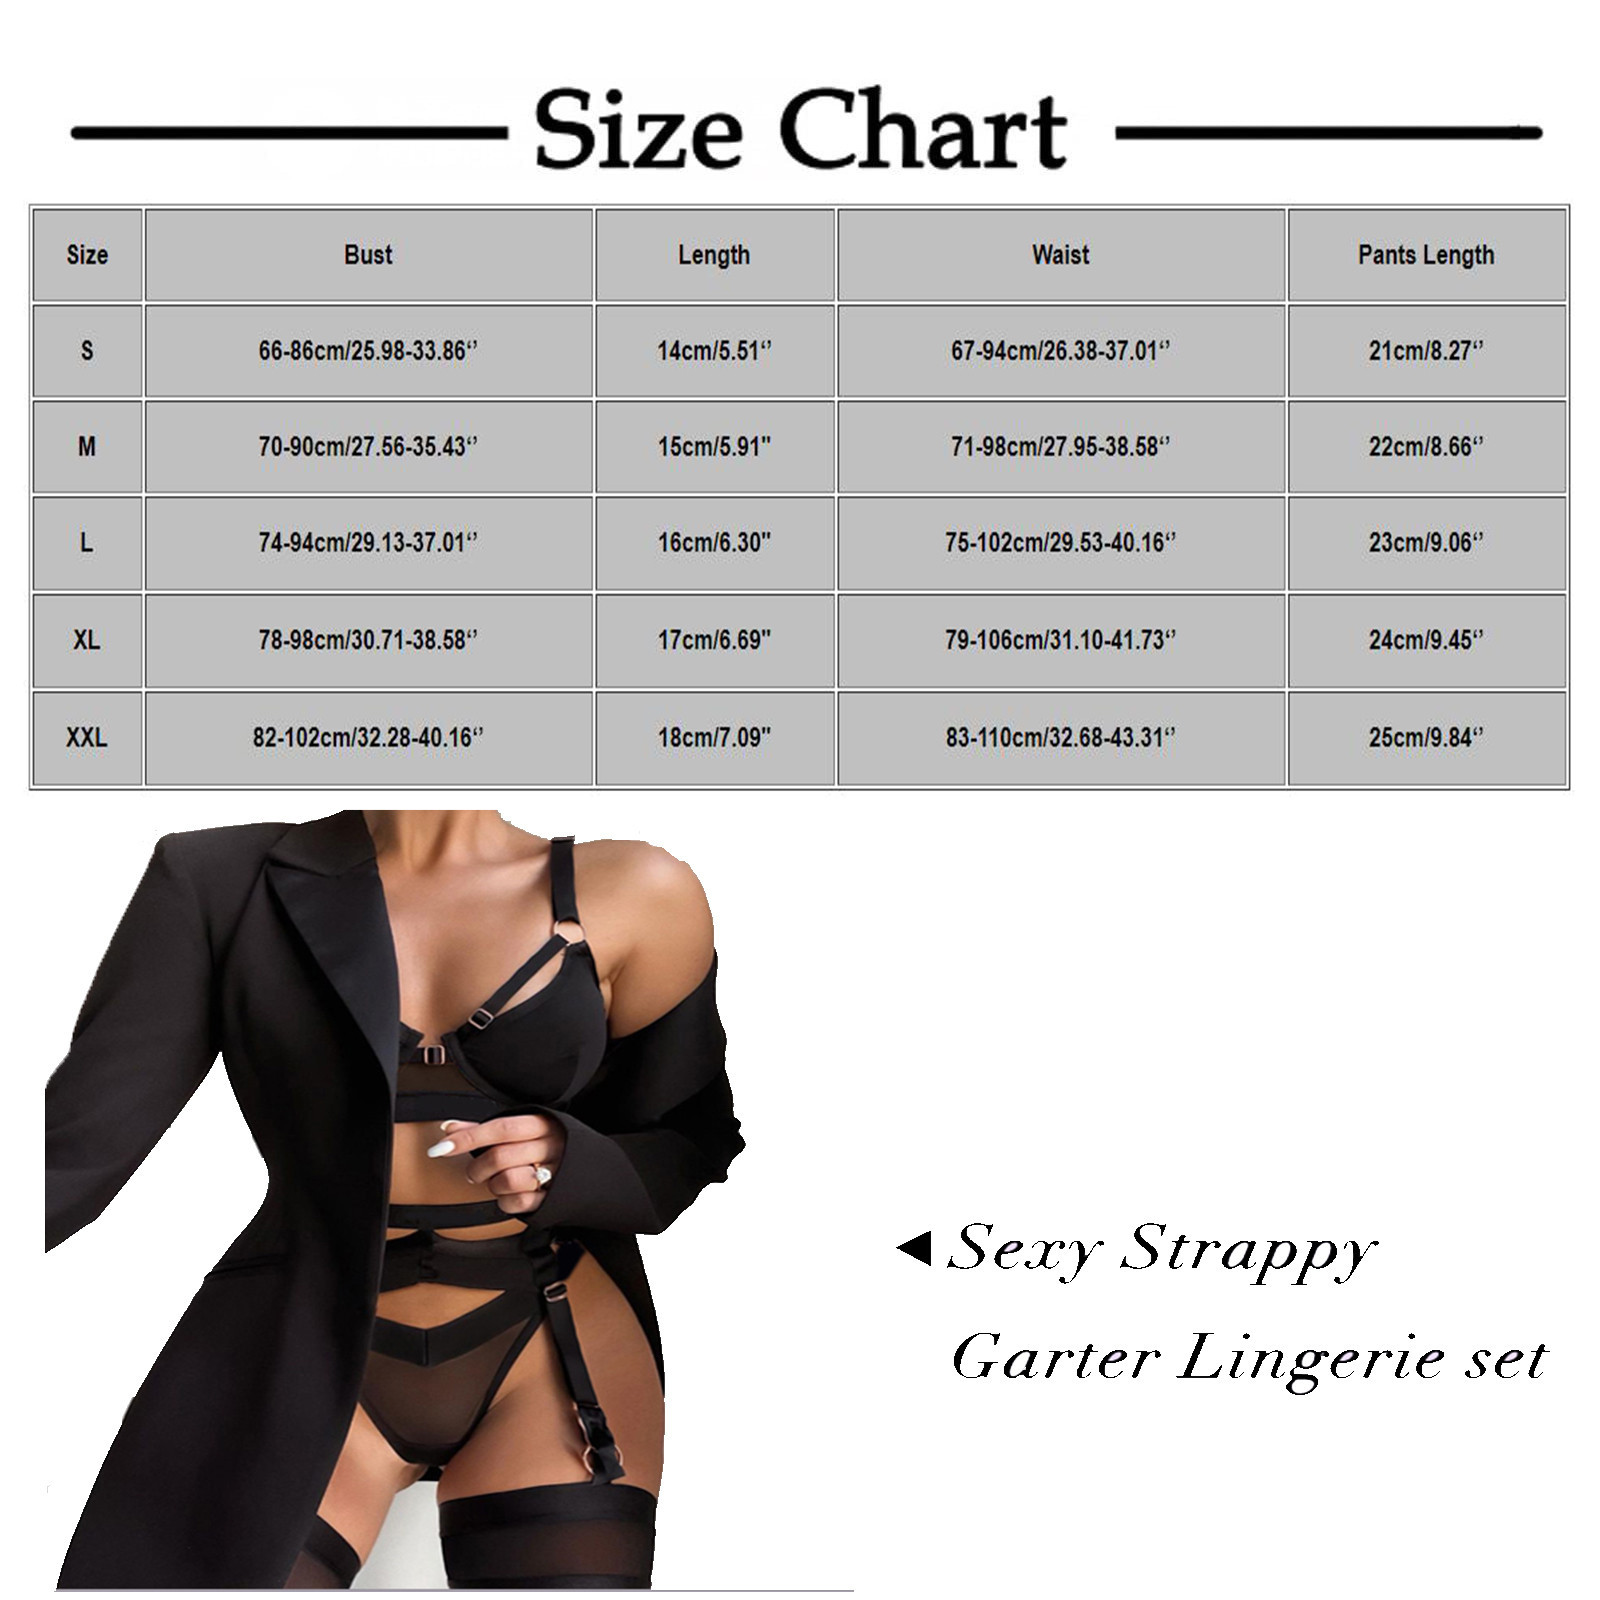 BIZIZA Fishnet Lingerie Corset 2 Piece Womens with Stockings Sexy Bra and Panty Sets 3 Pieces Sleepwear for Women Dark Green 2XL - image 2 of 8